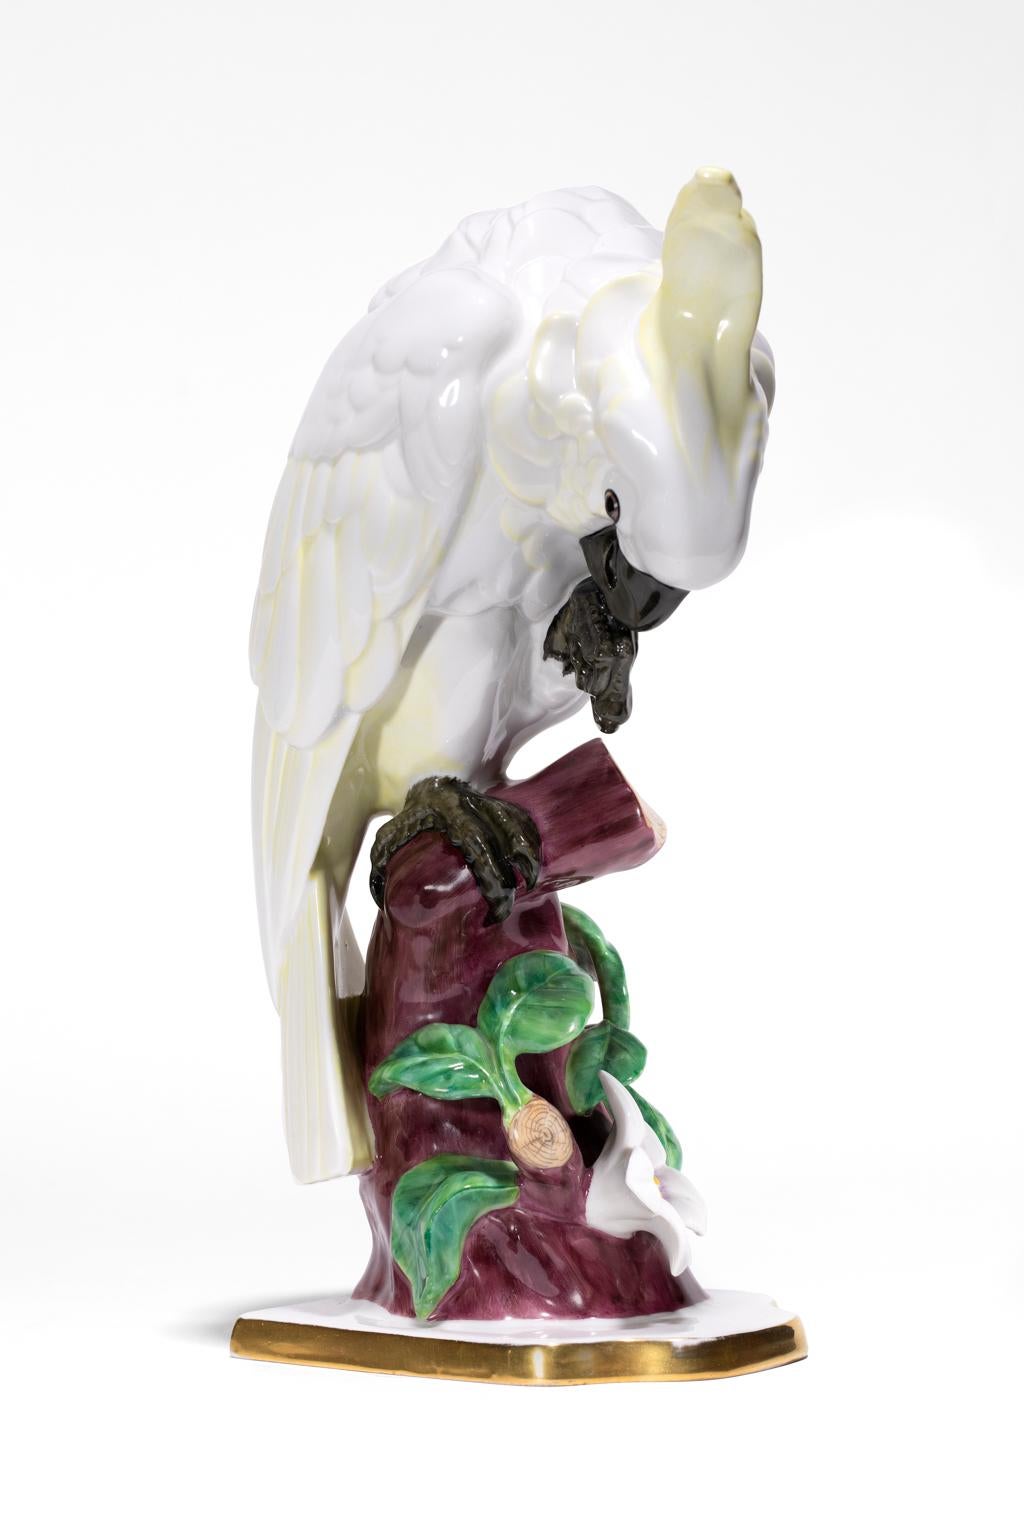 Cockatoo's are birds of great distinction with their crown of plumage. Our Cockatoo in this porcelain is absorbed in a daily task of preening while perched on a flowering branch of a fruit tree. The posture is exquisitely rendered and the feathers